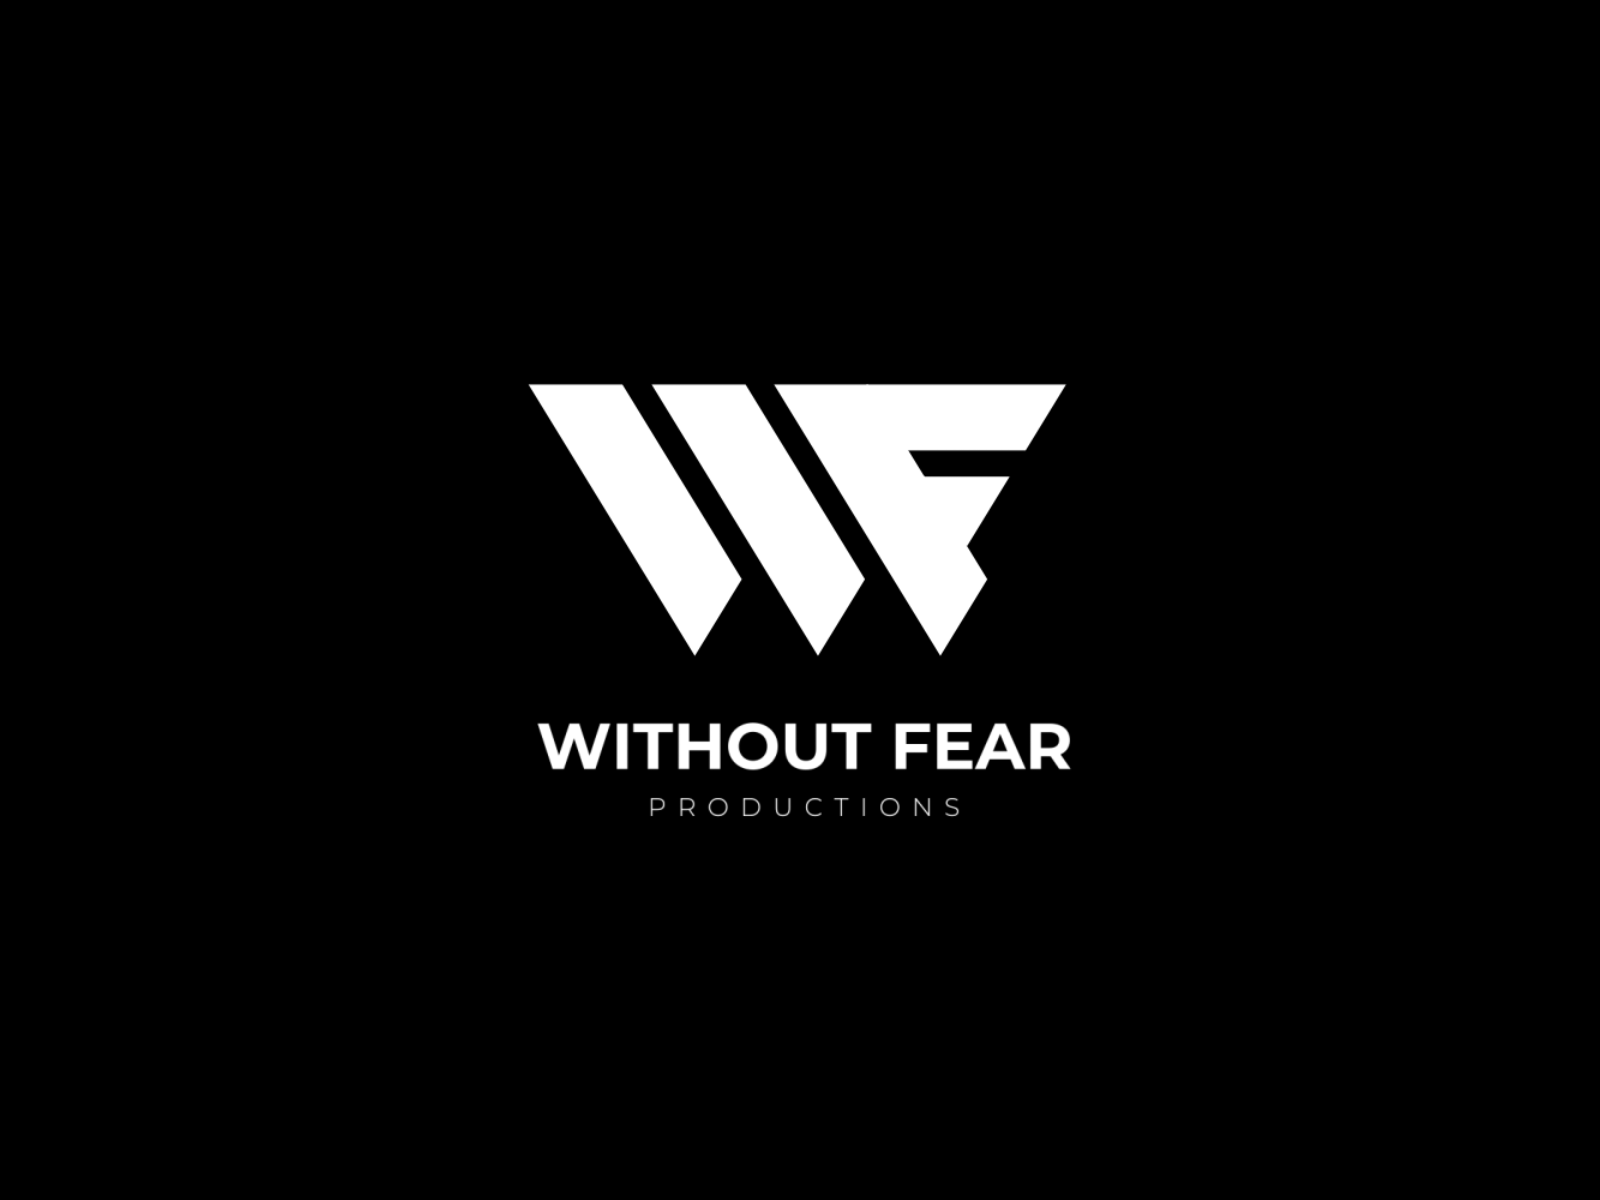 Without Fear Logo Animation 2d animation adobeaftereffects aftereffects animated logo animatedlogo cinematic intro logo and branding logo animation logoanimation logodesign logomotion logos logotype mdcommunity mograph motion design motion graphic motiongraphics youtube intro